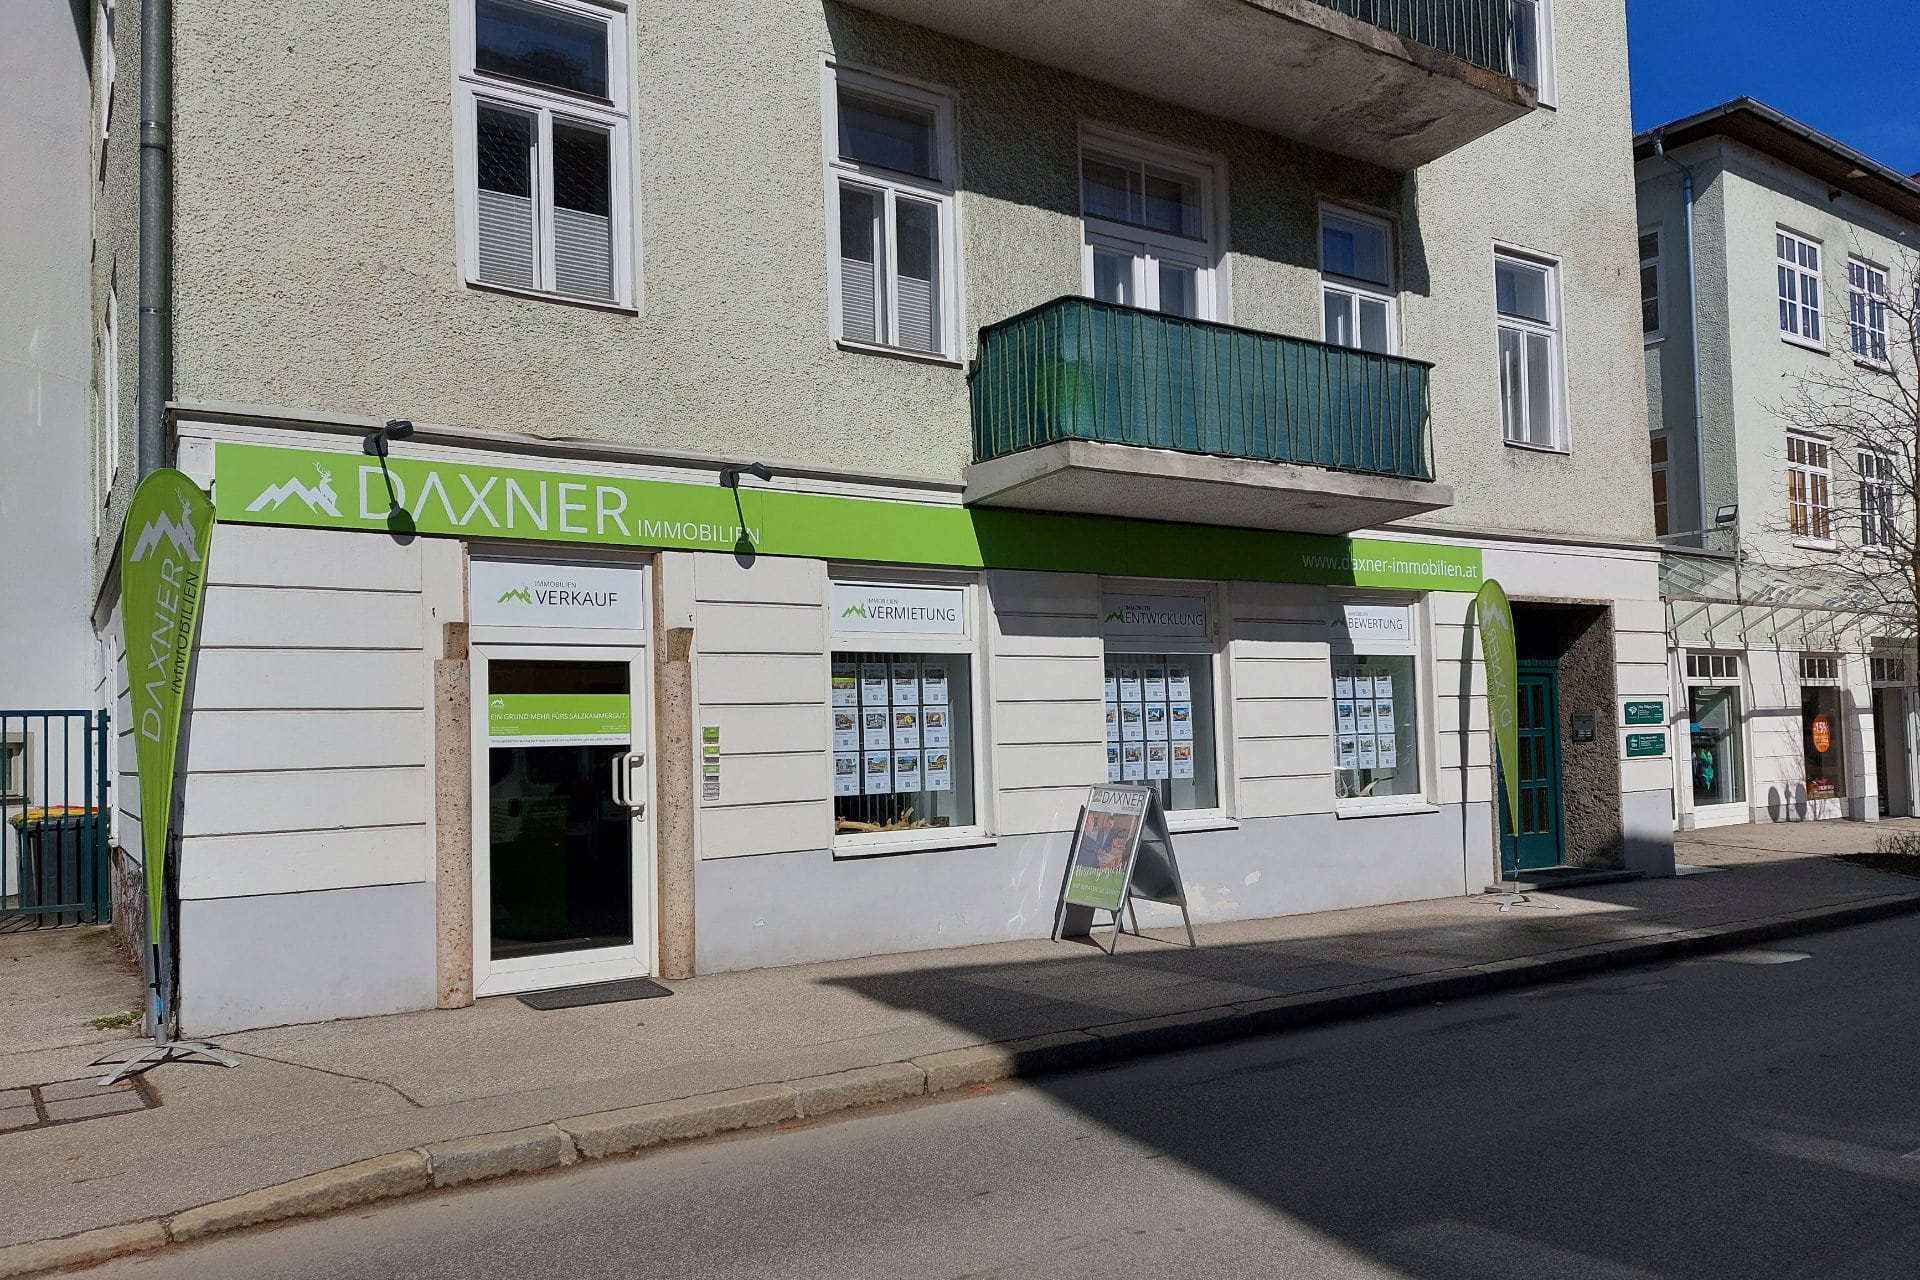 (c) Daxner-immobilien.at